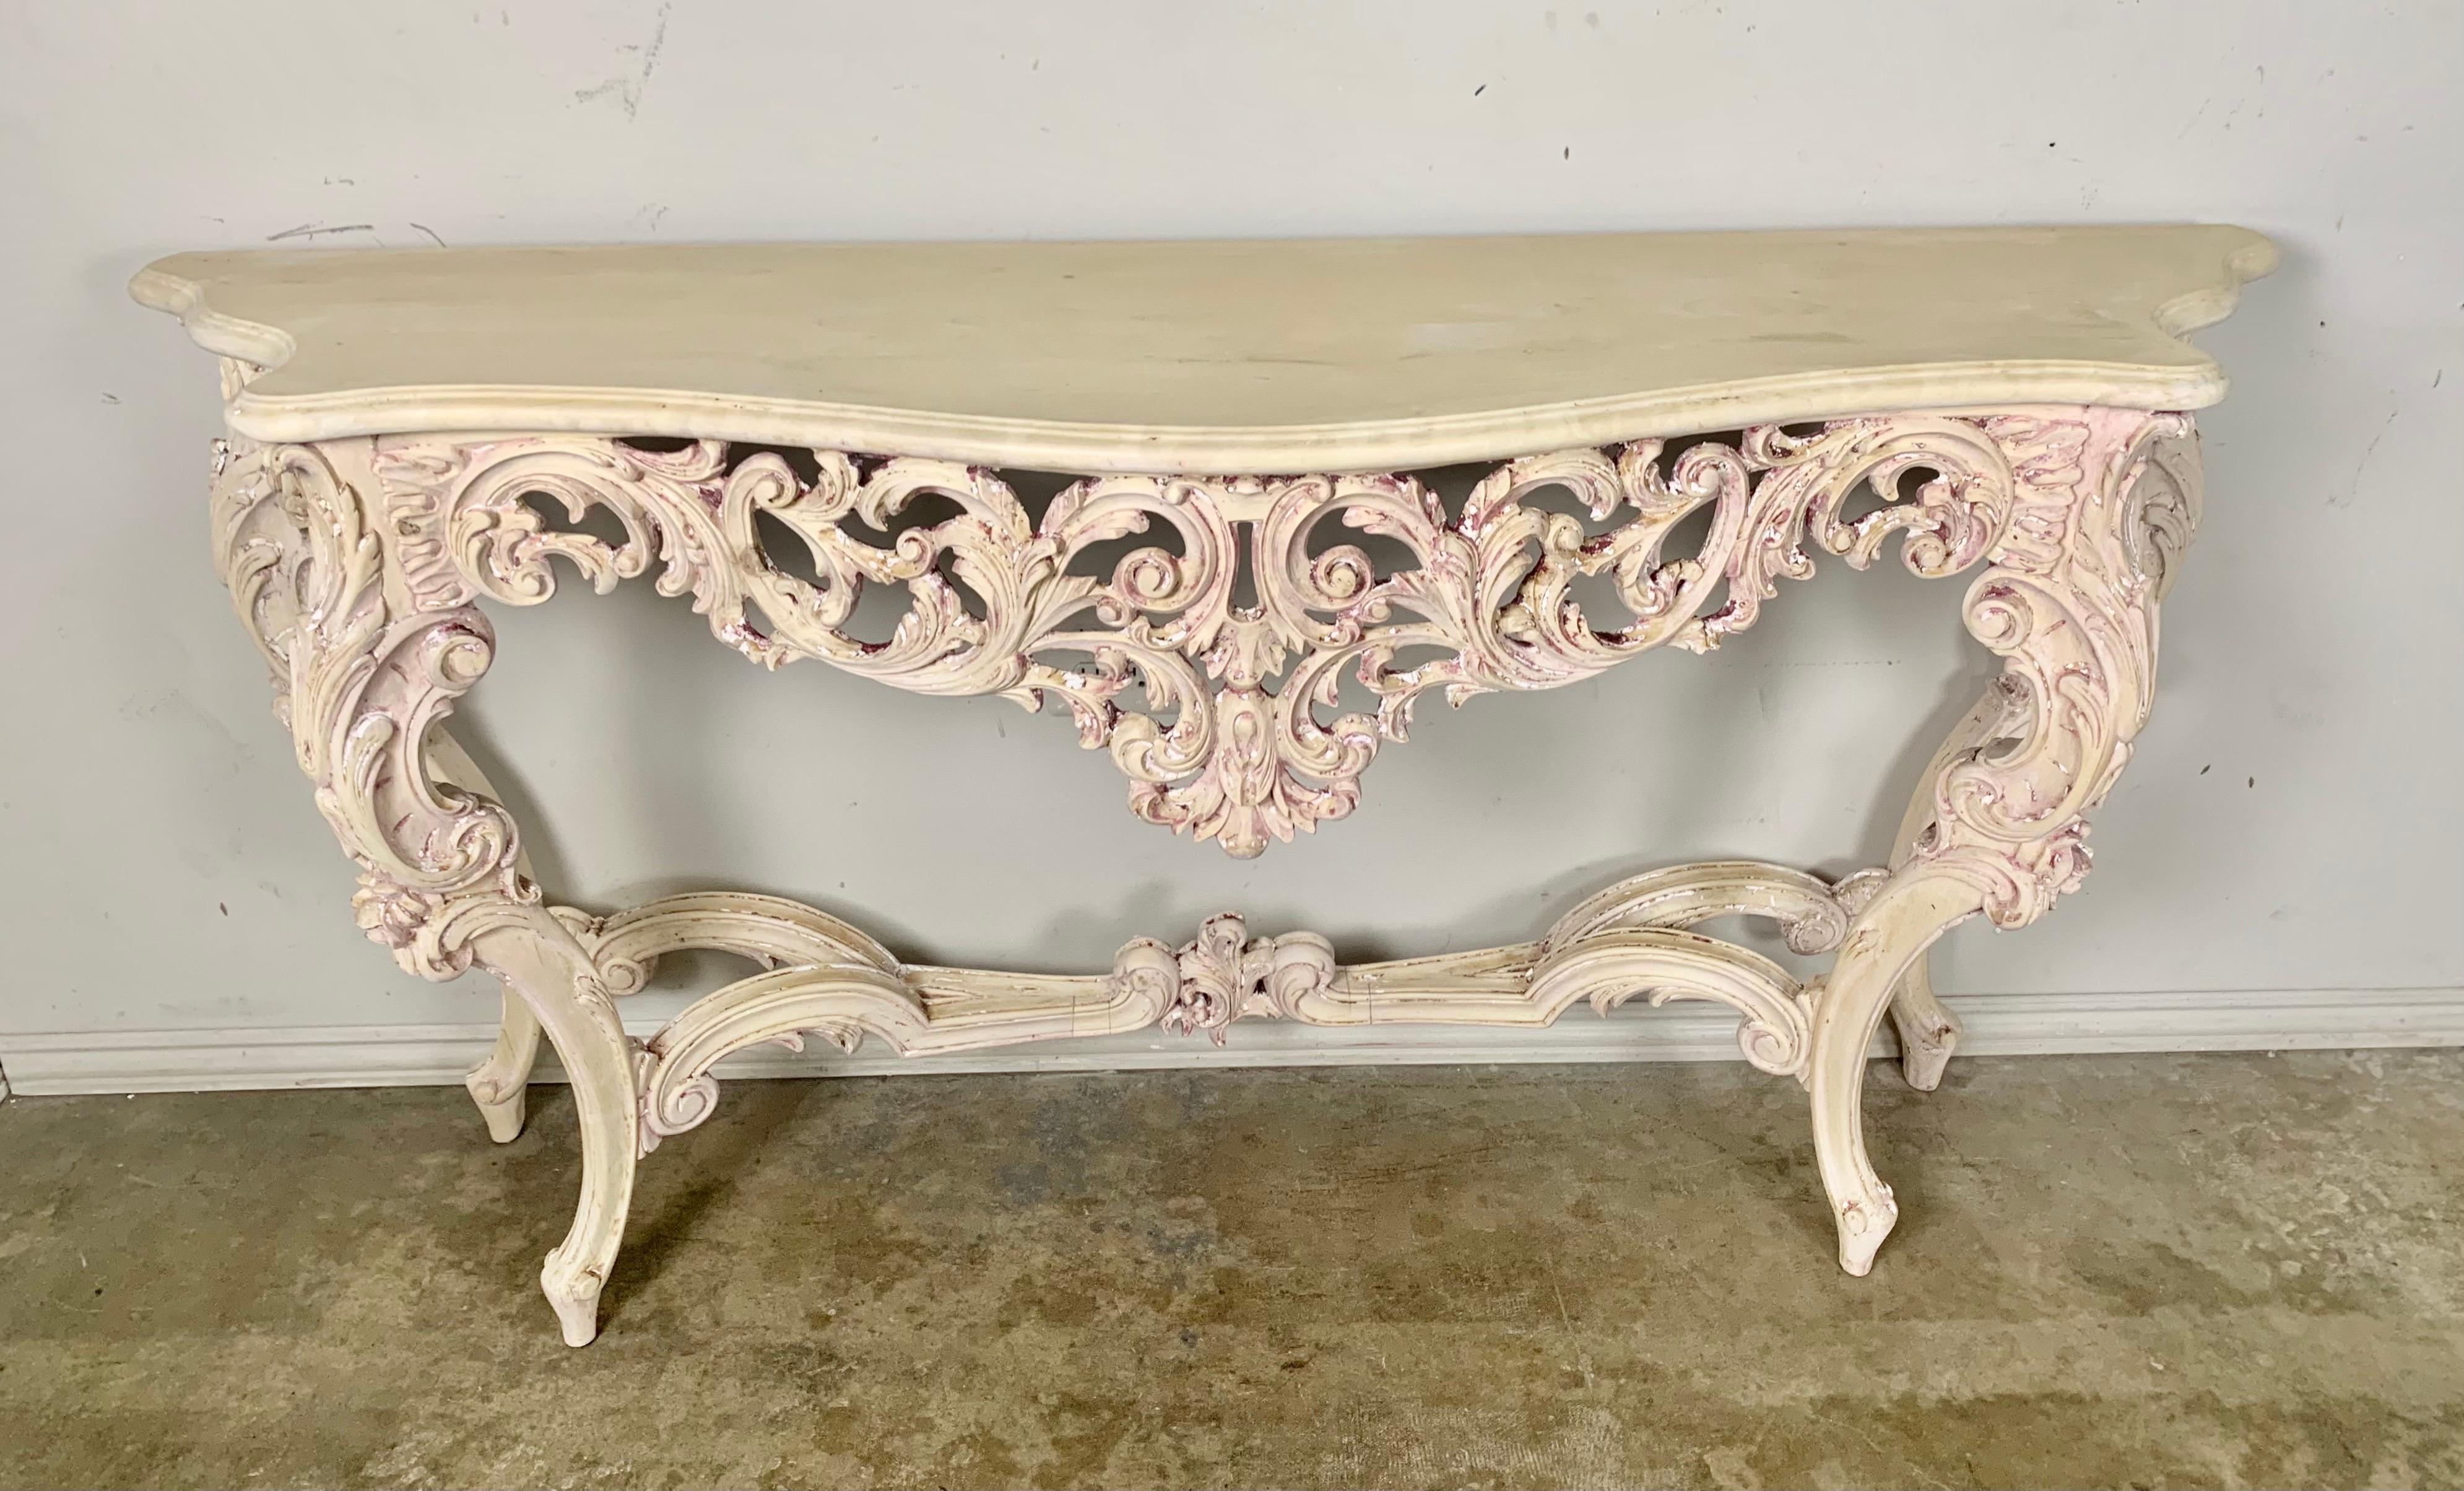 French carved wood Rococo style console with simple wood top. The console stands on four cabriole legs with a stretcher that meets at a center finial.